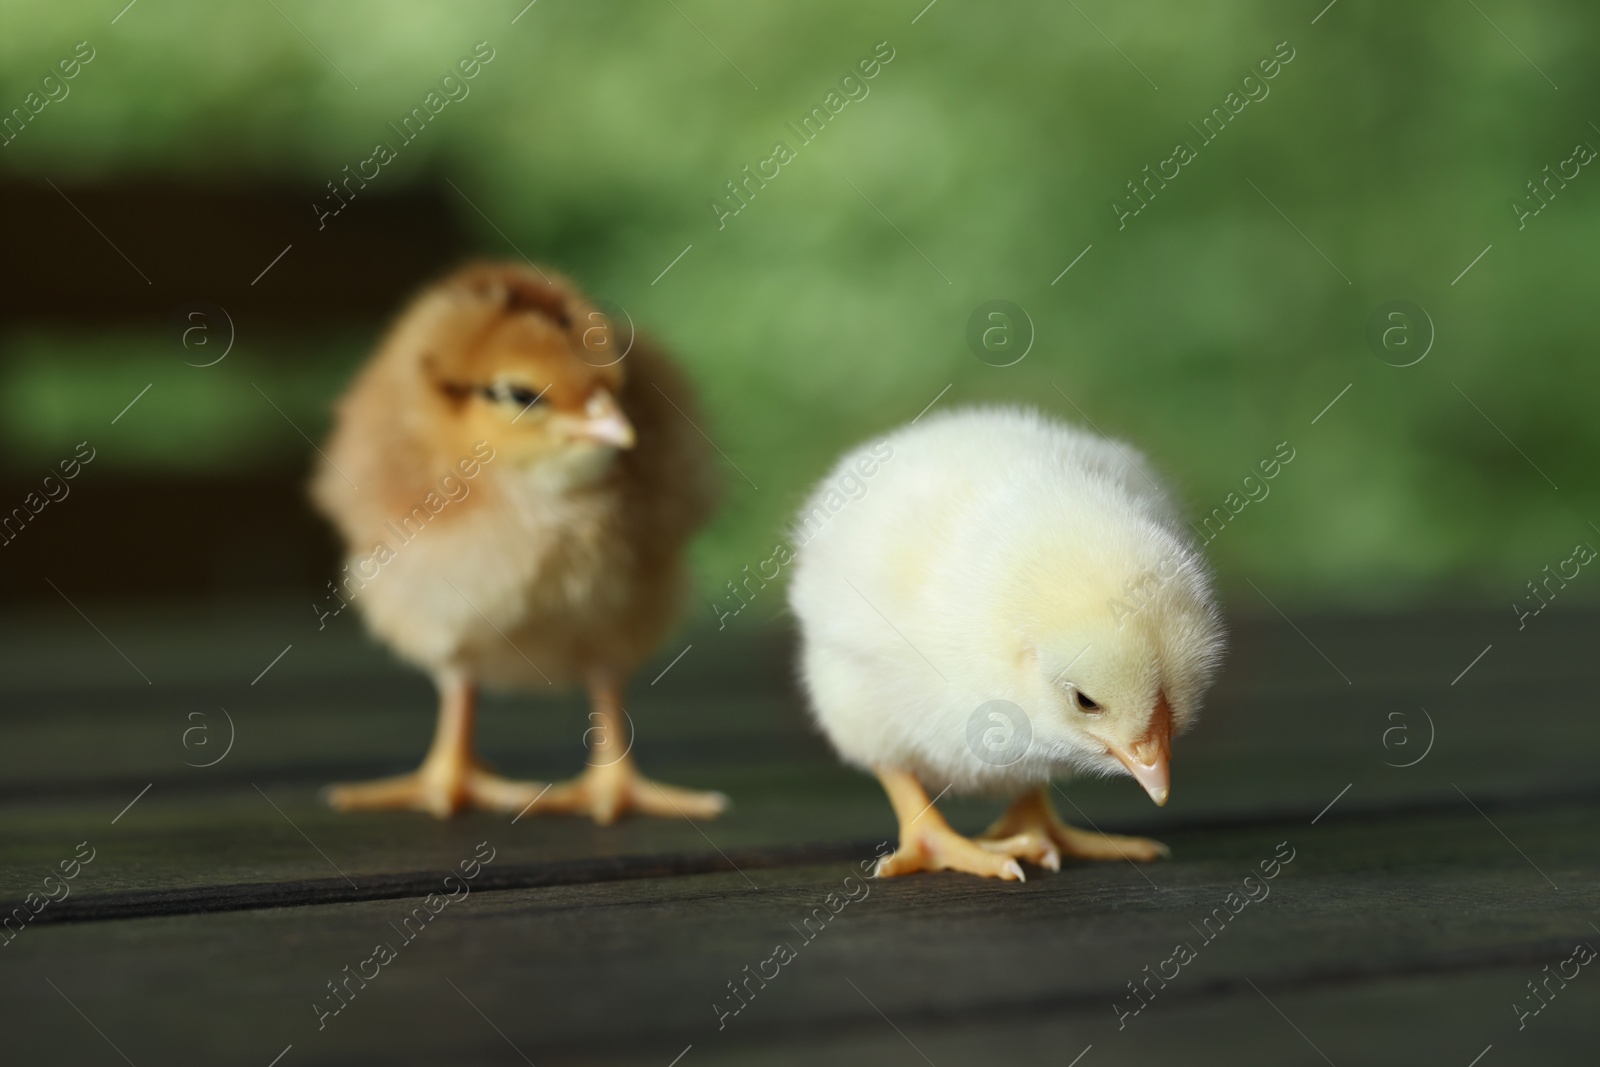 Photo of Two cute chicks on wooden surface outdoors, closeup. Baby animals